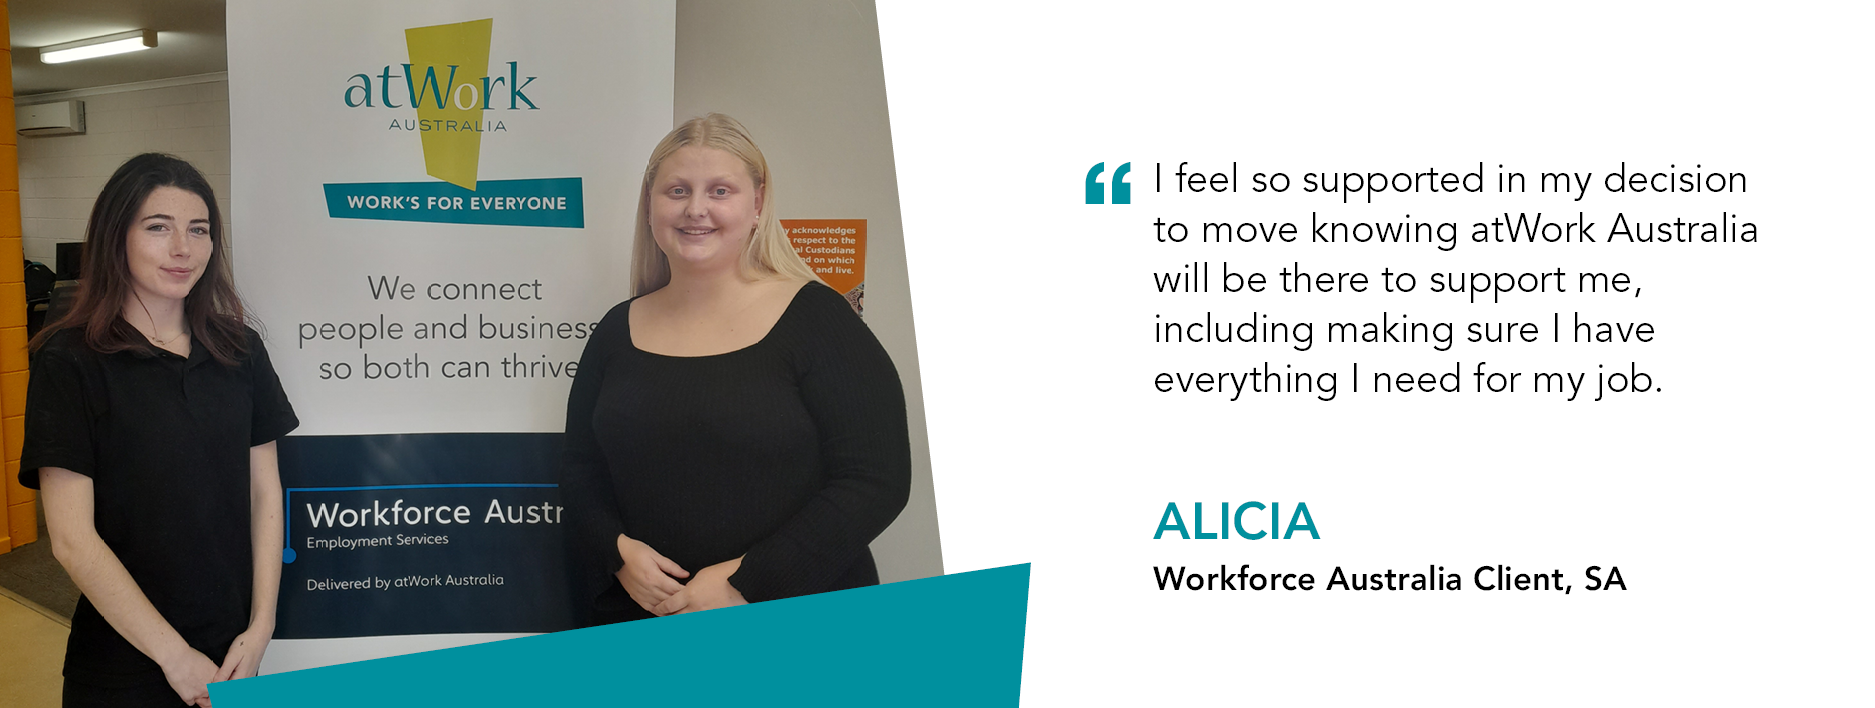 Quote reads: “I feel so supported in my decision to move knowing atWork Australia will be there to support me, including making sure I have everything I need for my job,” - Alicia, Workforce Australia client. 